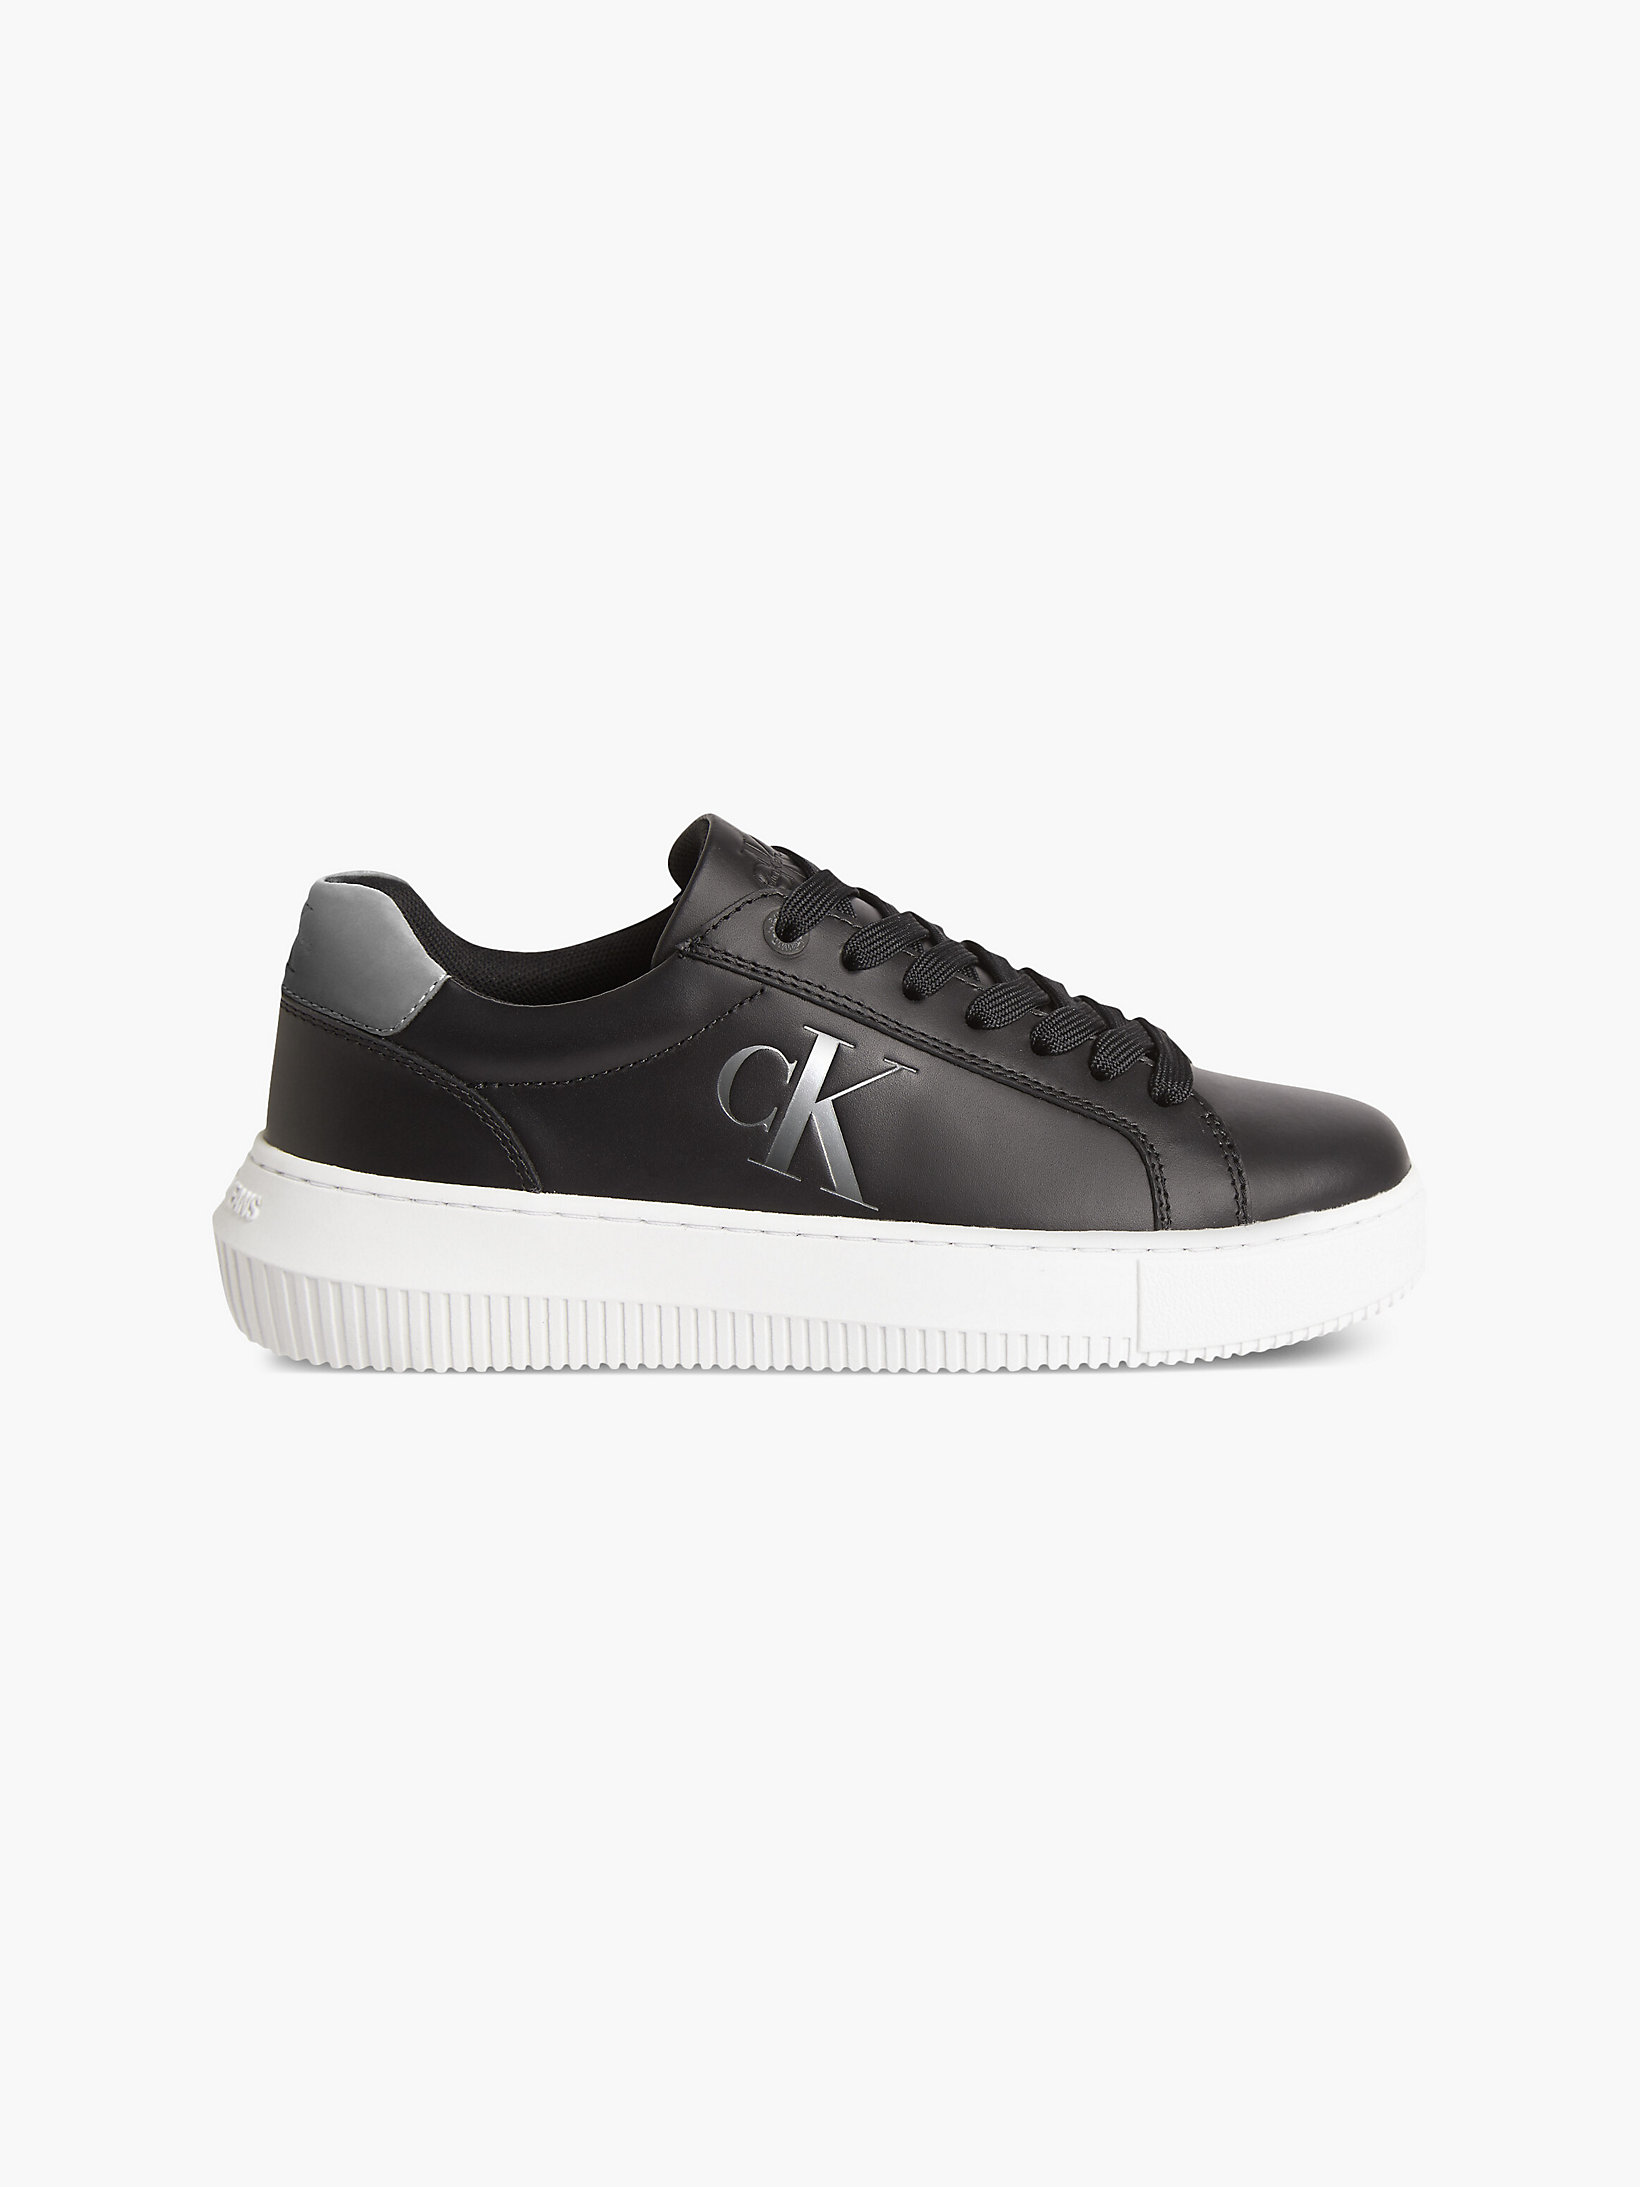 Black / Silver Leather Trainers undefined women Calvin Klein